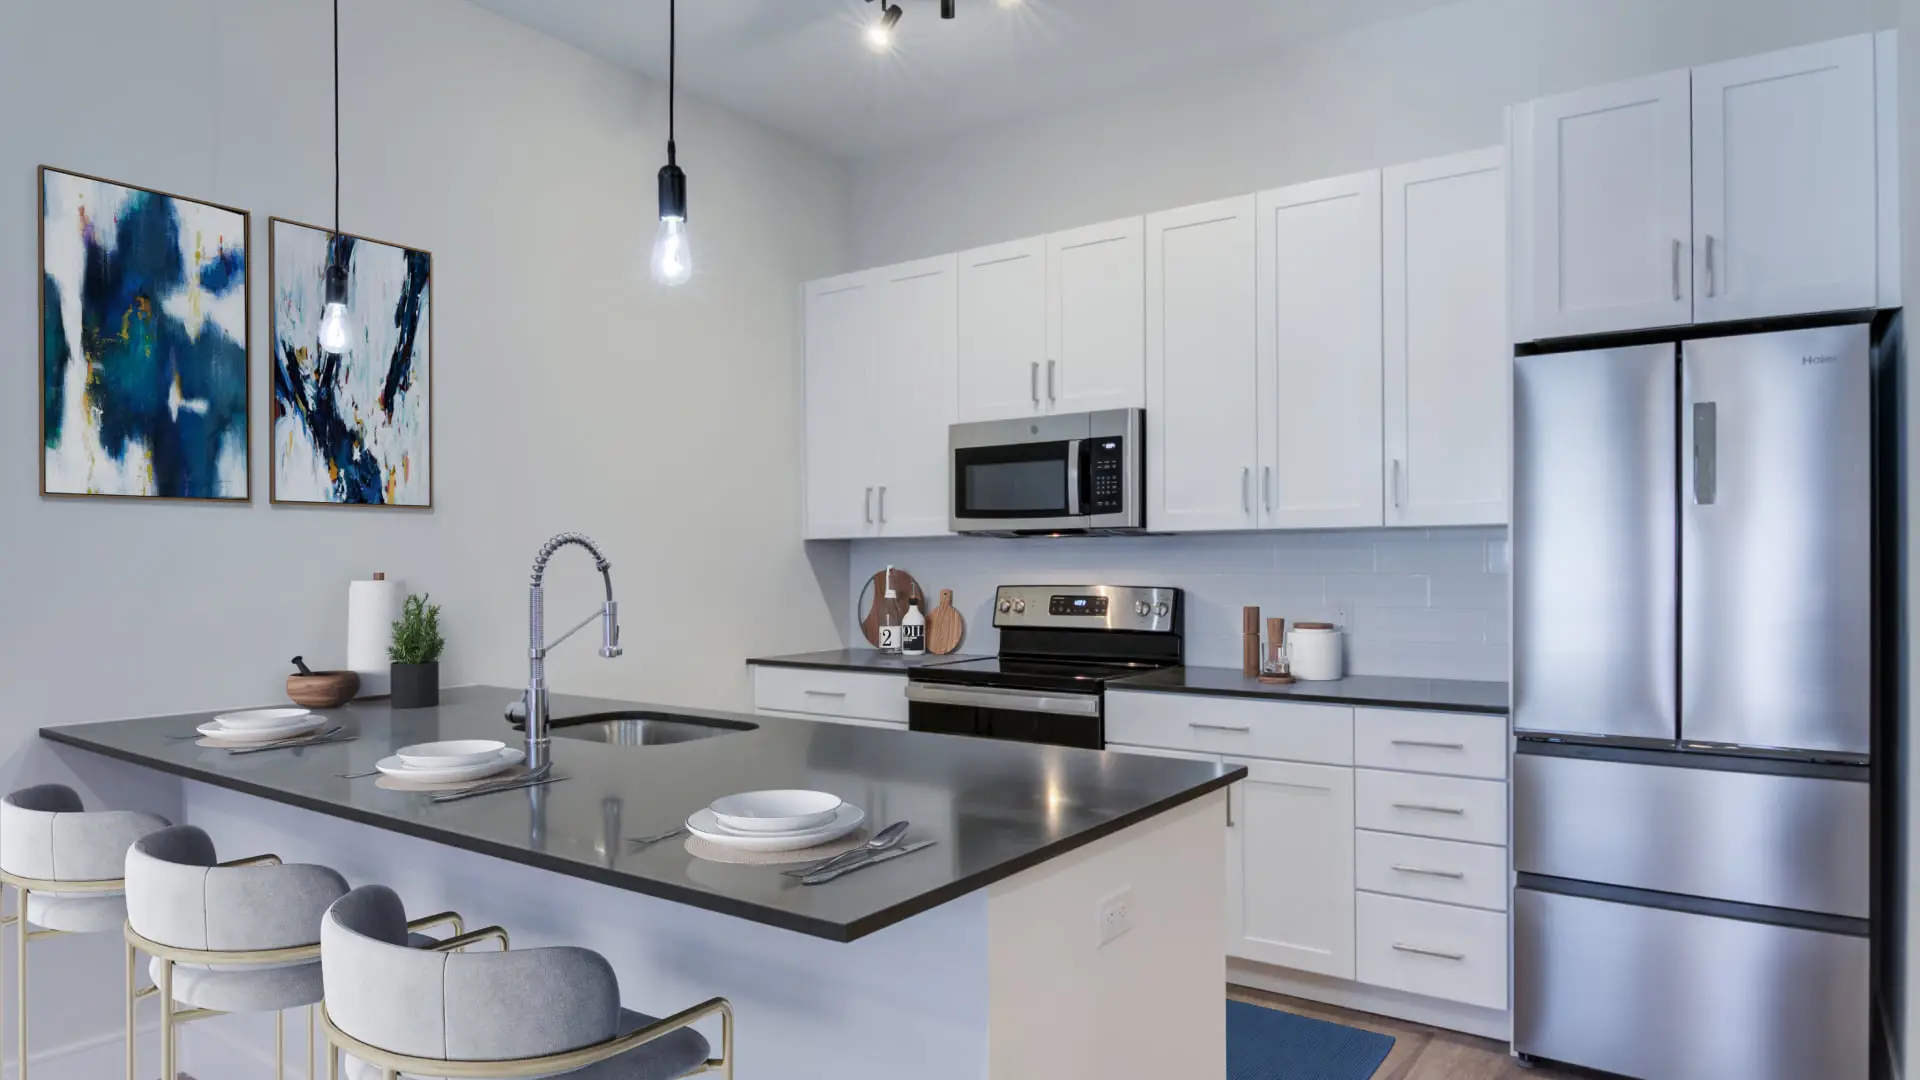 The Beacon furnished apartment kitchen close up with white cabinets, a peninsula style black countertop with bar stool overhang, undermounted sink, and stainless steel appliances